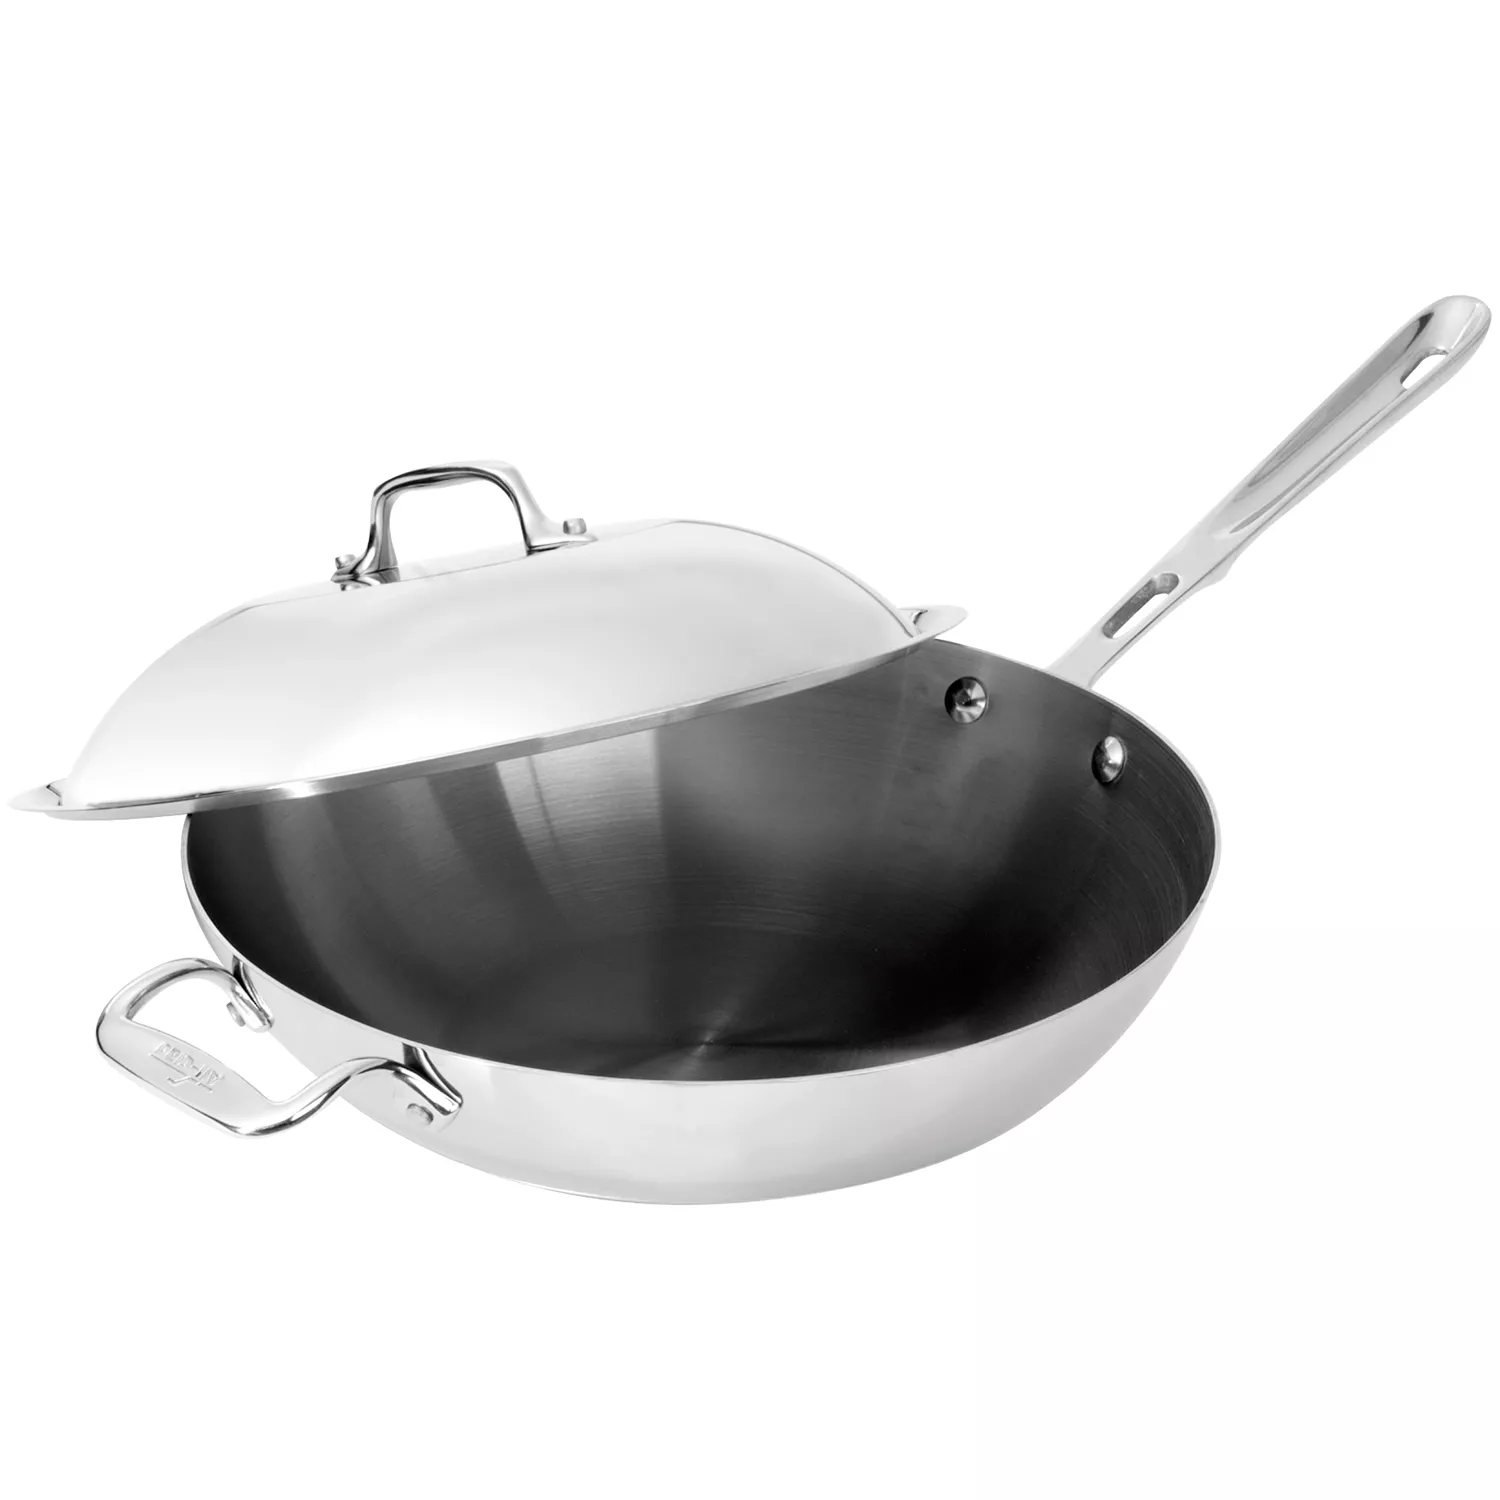 All-Clad Copper Core Chef’s Pan with Lid, 12